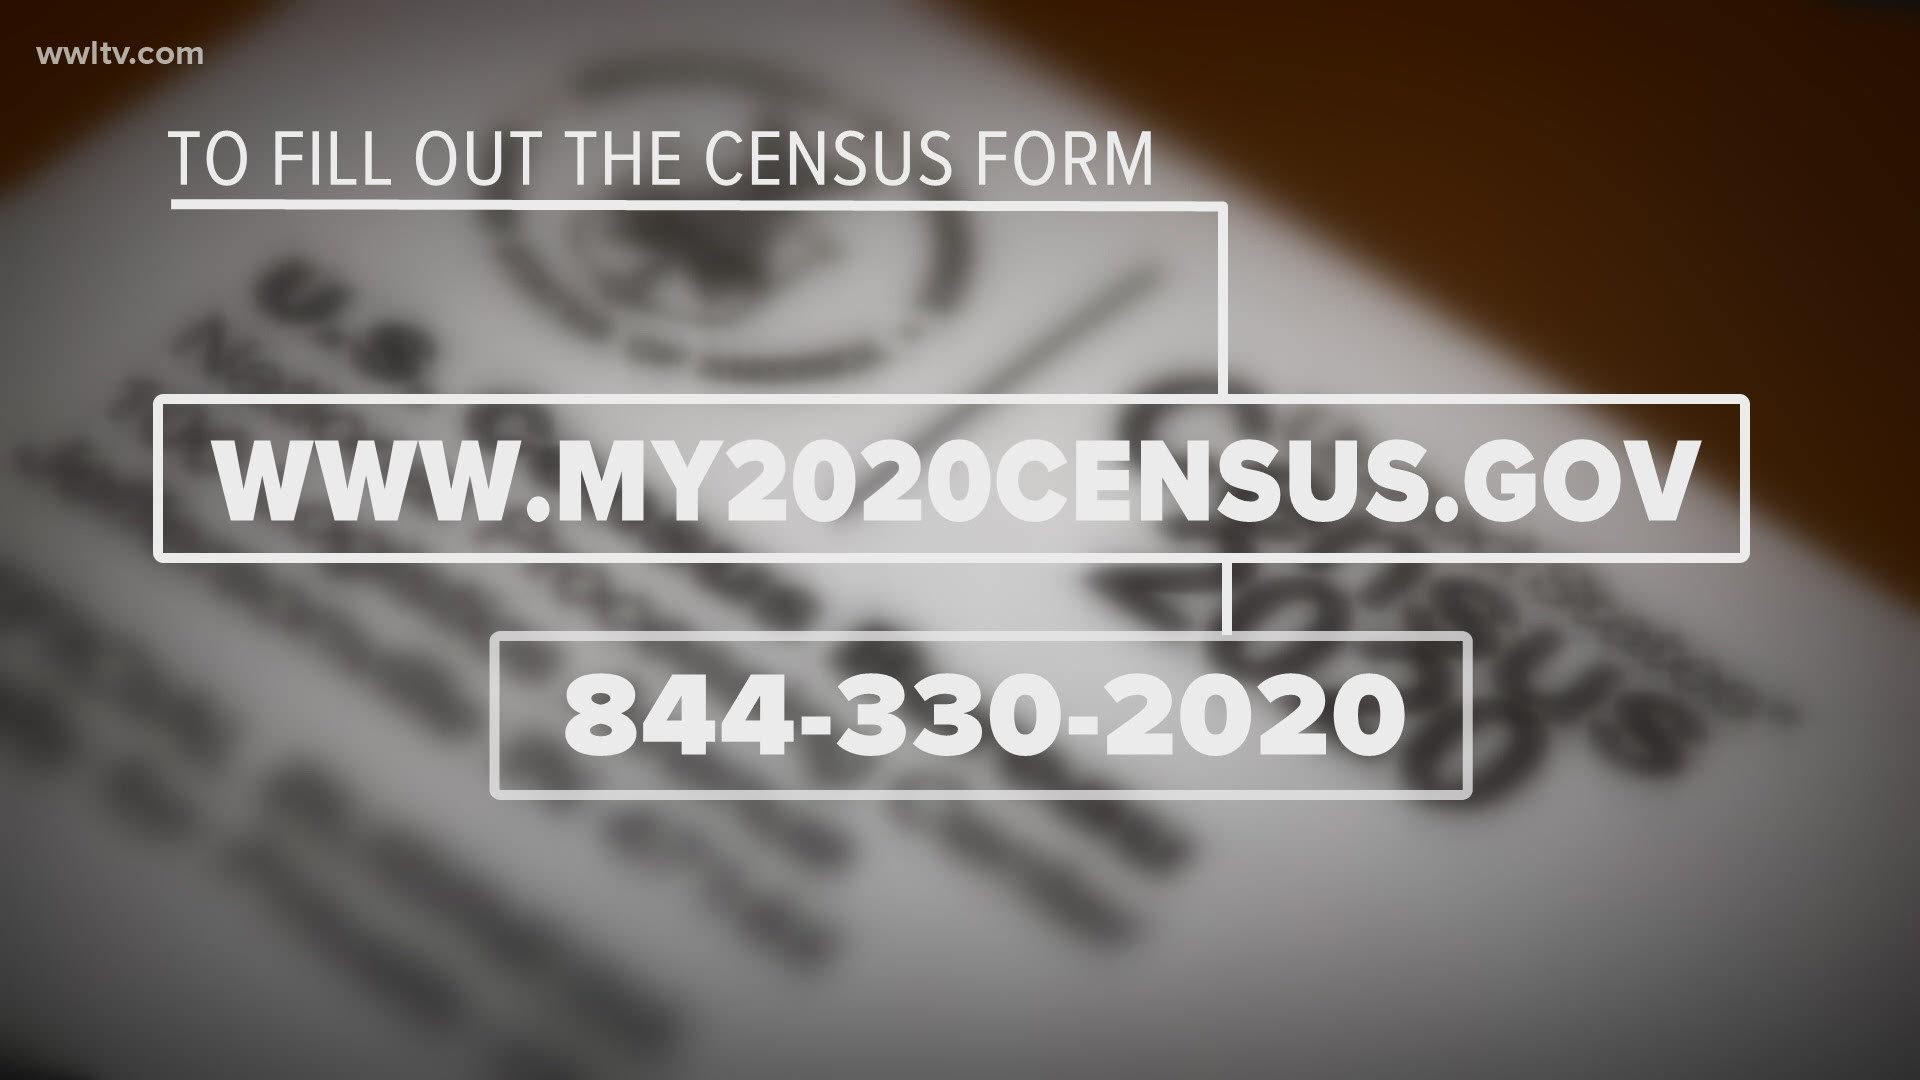 "For every 1 percent of our population that completes the census, we can expect to receive an additional $120 million in important federal funding."